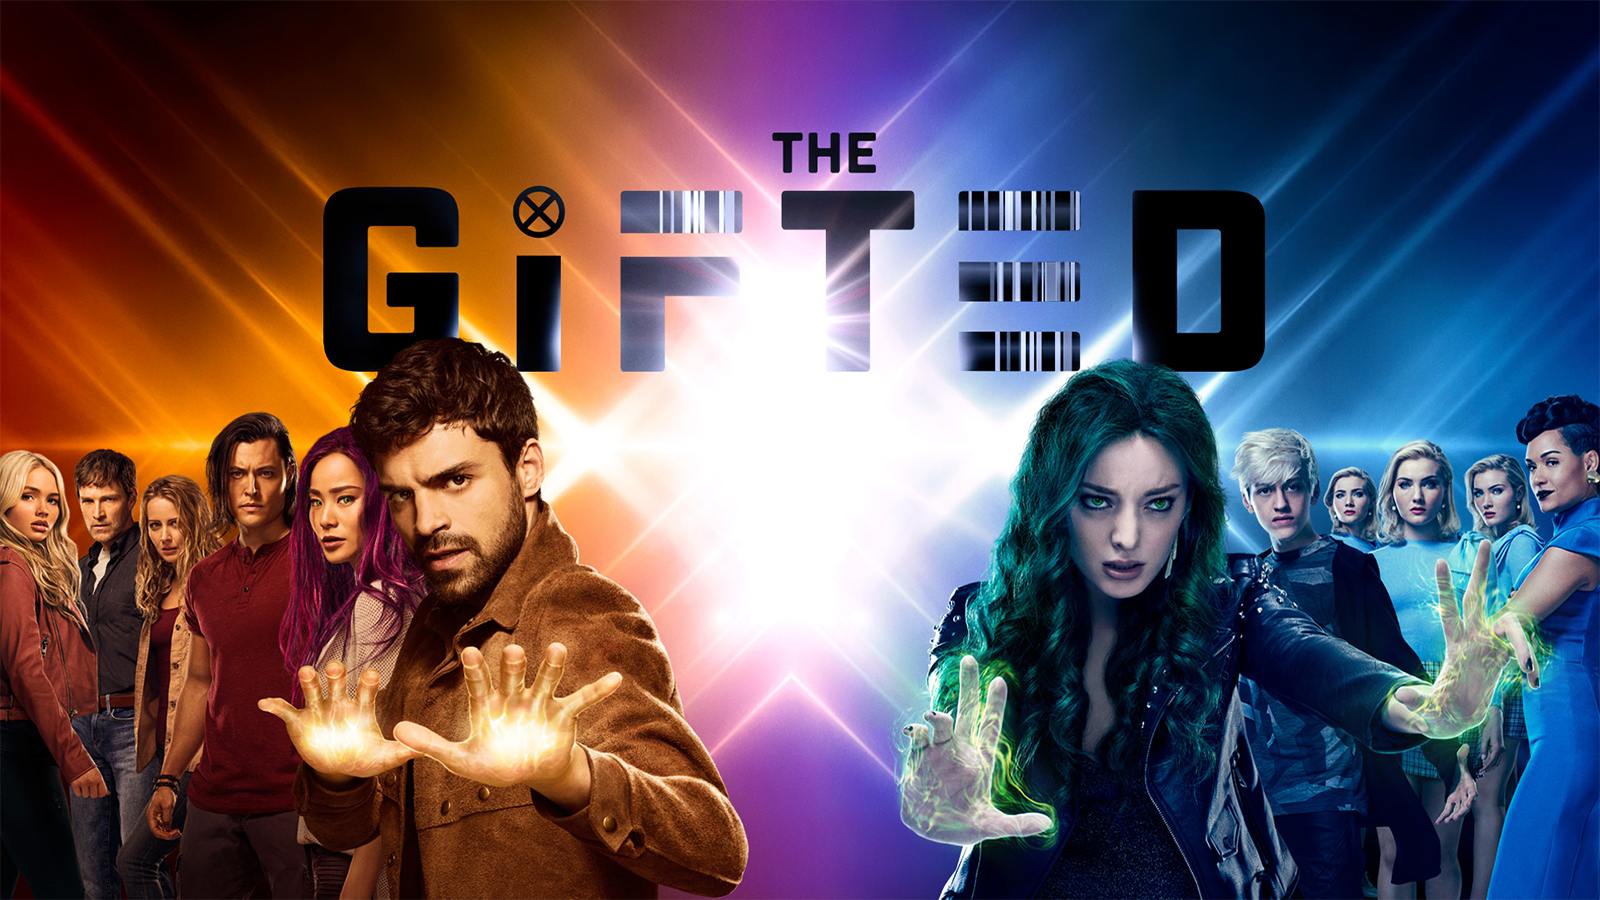 The Gifted Season 1 (Complete First Season) 3 dvd's | eBay